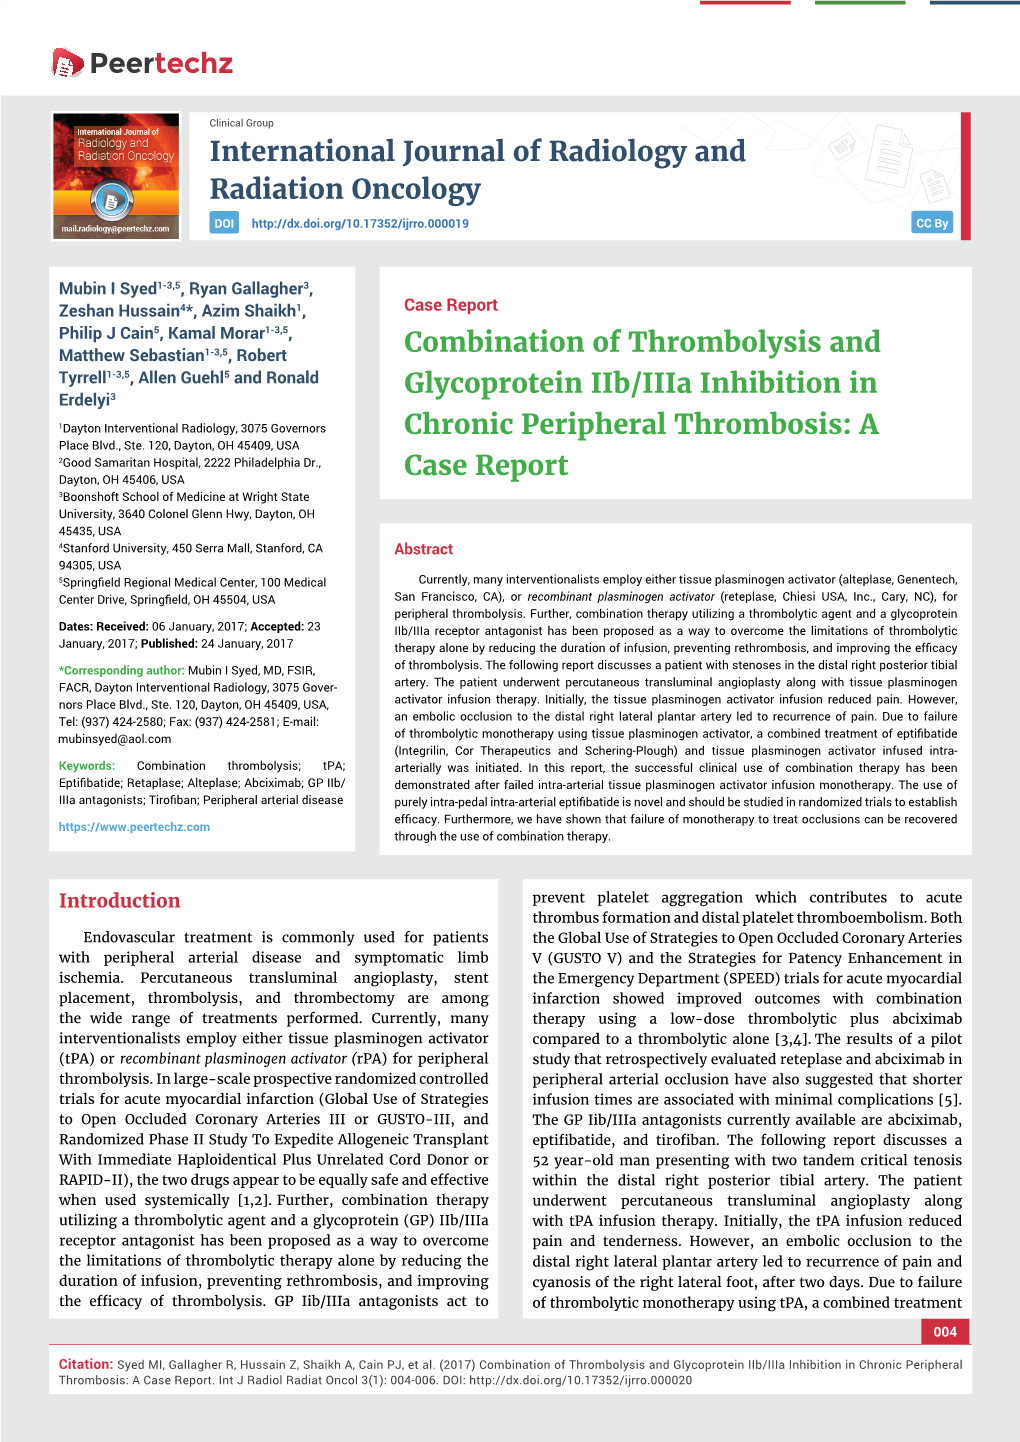 Combination of Thrombolysis and Glycoprotein Iib/Iiia Inhibition in Chronic Peripheral Thrombosis: a Case Report